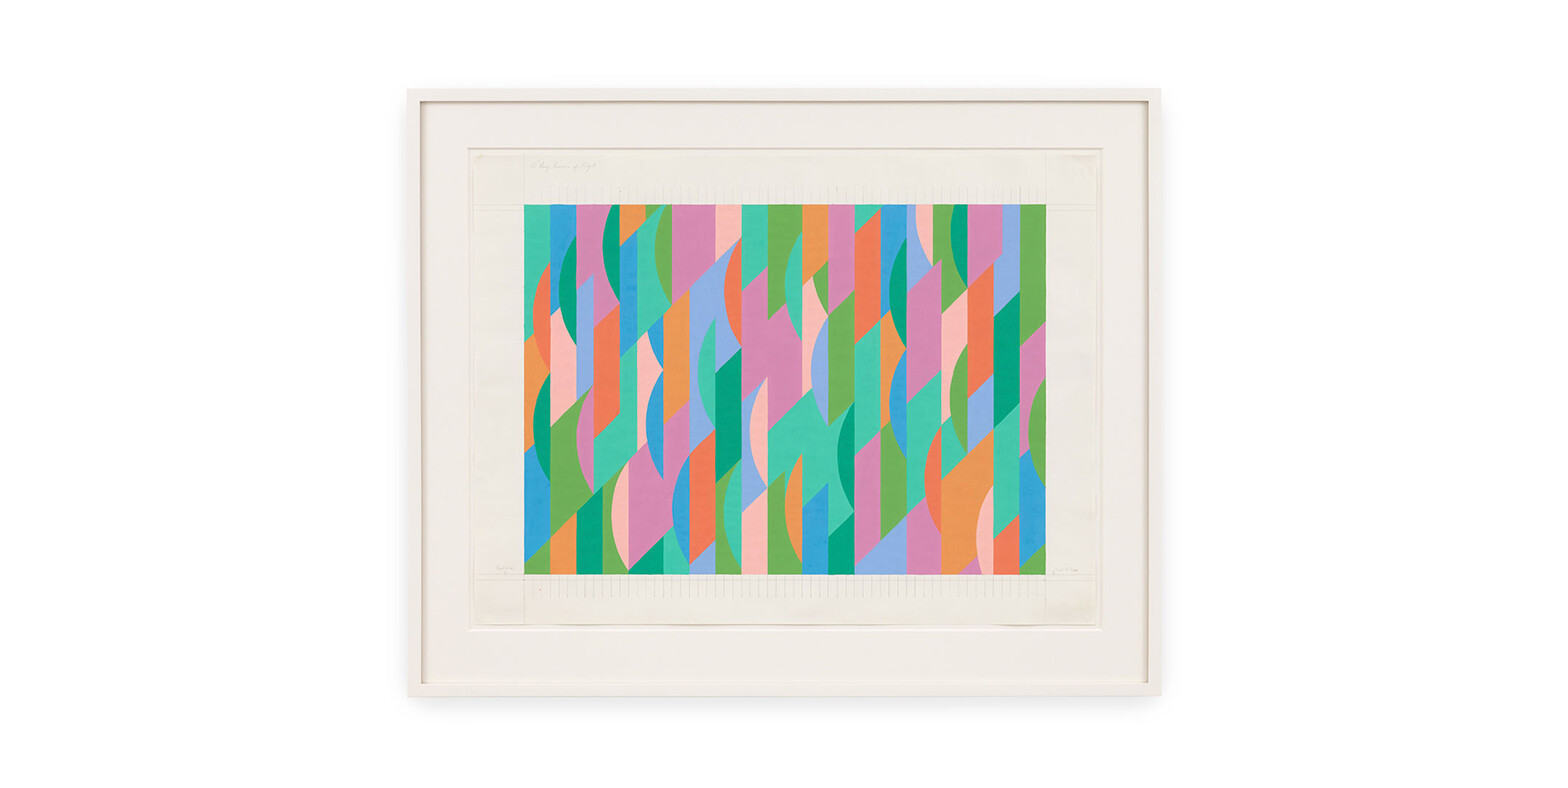 A study by Bridget Riley, titled 10th Aug Revision of July 8, dated 1997.